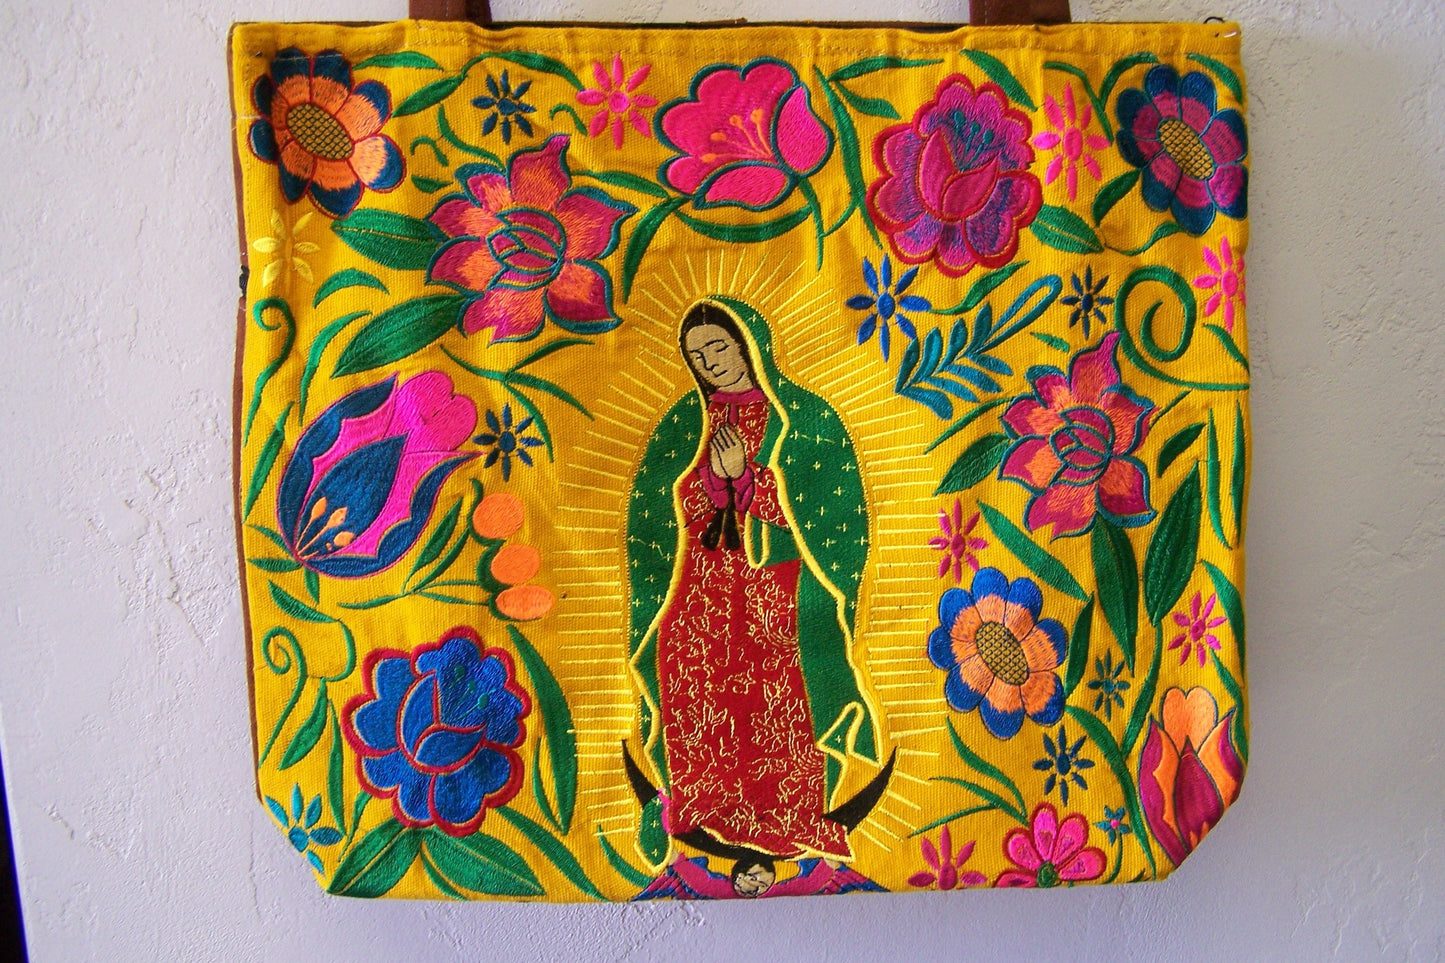 Virgin of Guadalupe Large Embroidered Leather Shoulder Bag Purse, Lined Interior, 2 Zipper Pouches - Yellow